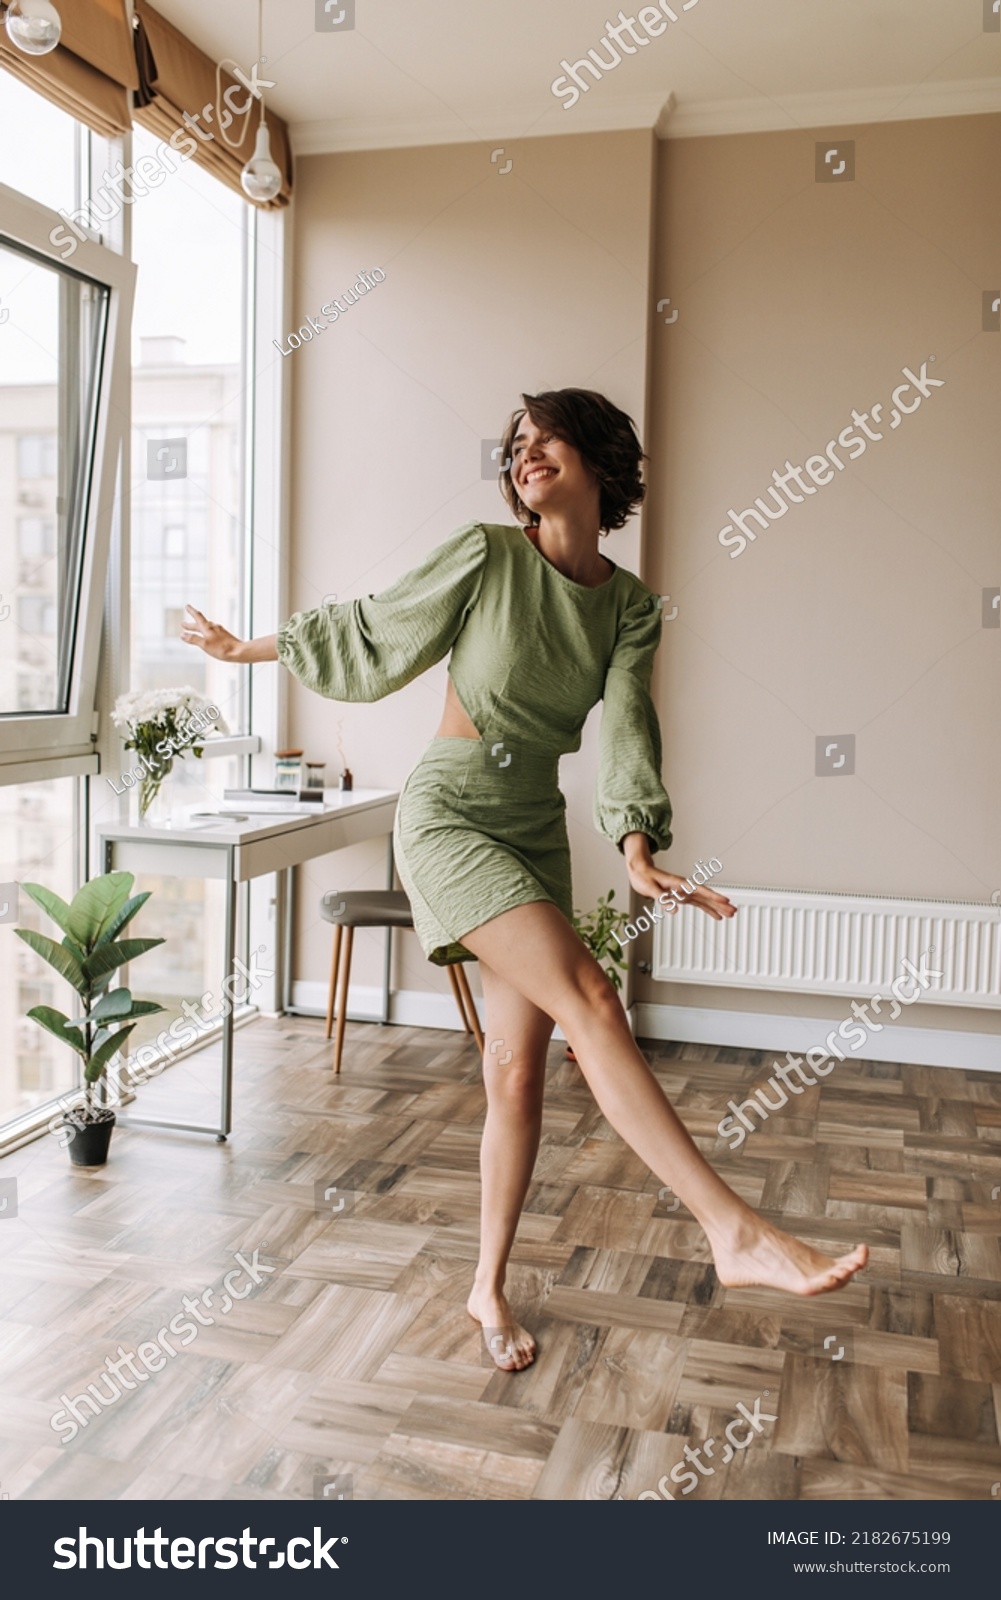 Full-length view of cheerful pretty woman staying in bright room . Caucasian short hair wear green dress smiling and looking at window. Lifestyle, leisure life concept  #2182675199